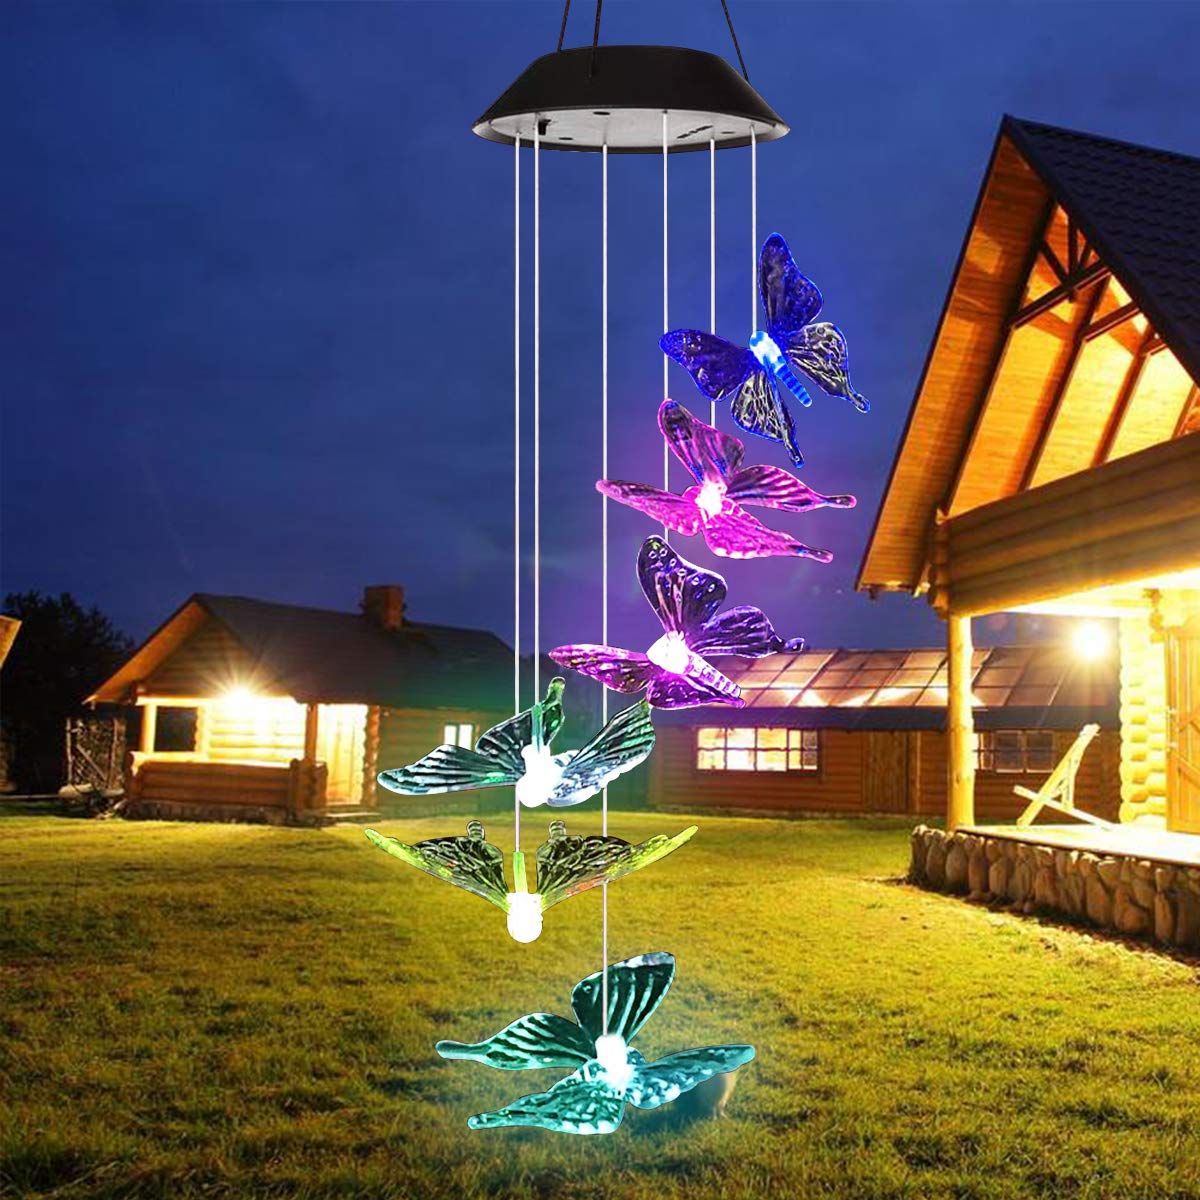 Solar Wind Chimes Outdoor, Waterproof Solar Butterfly Wind Chimes Color Changing LED Solar Powered Mobile Wind Chime, Hanging Decorative Romantic Patio Lights for Yard Garden Home Party - image 1 of 8